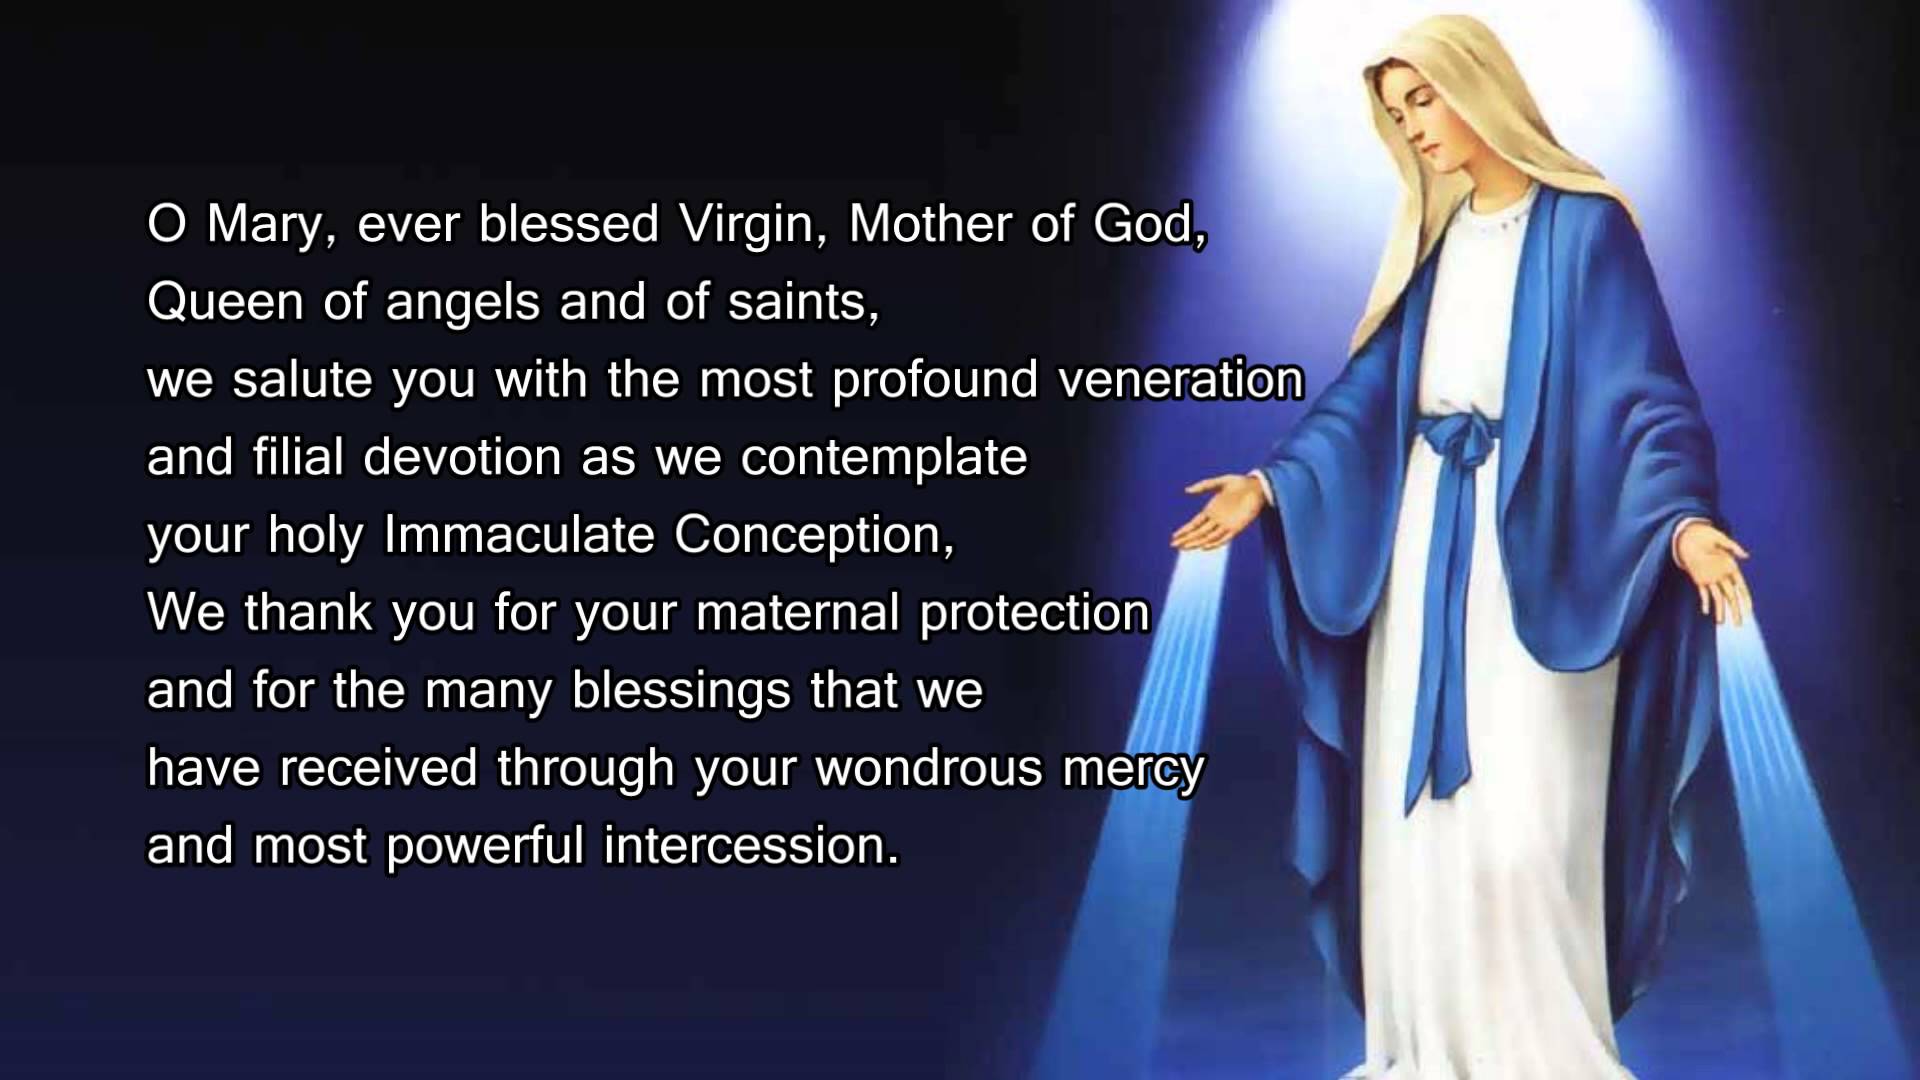 NOVENA TO THE IMMACULATE CONCEPTION, Day 2